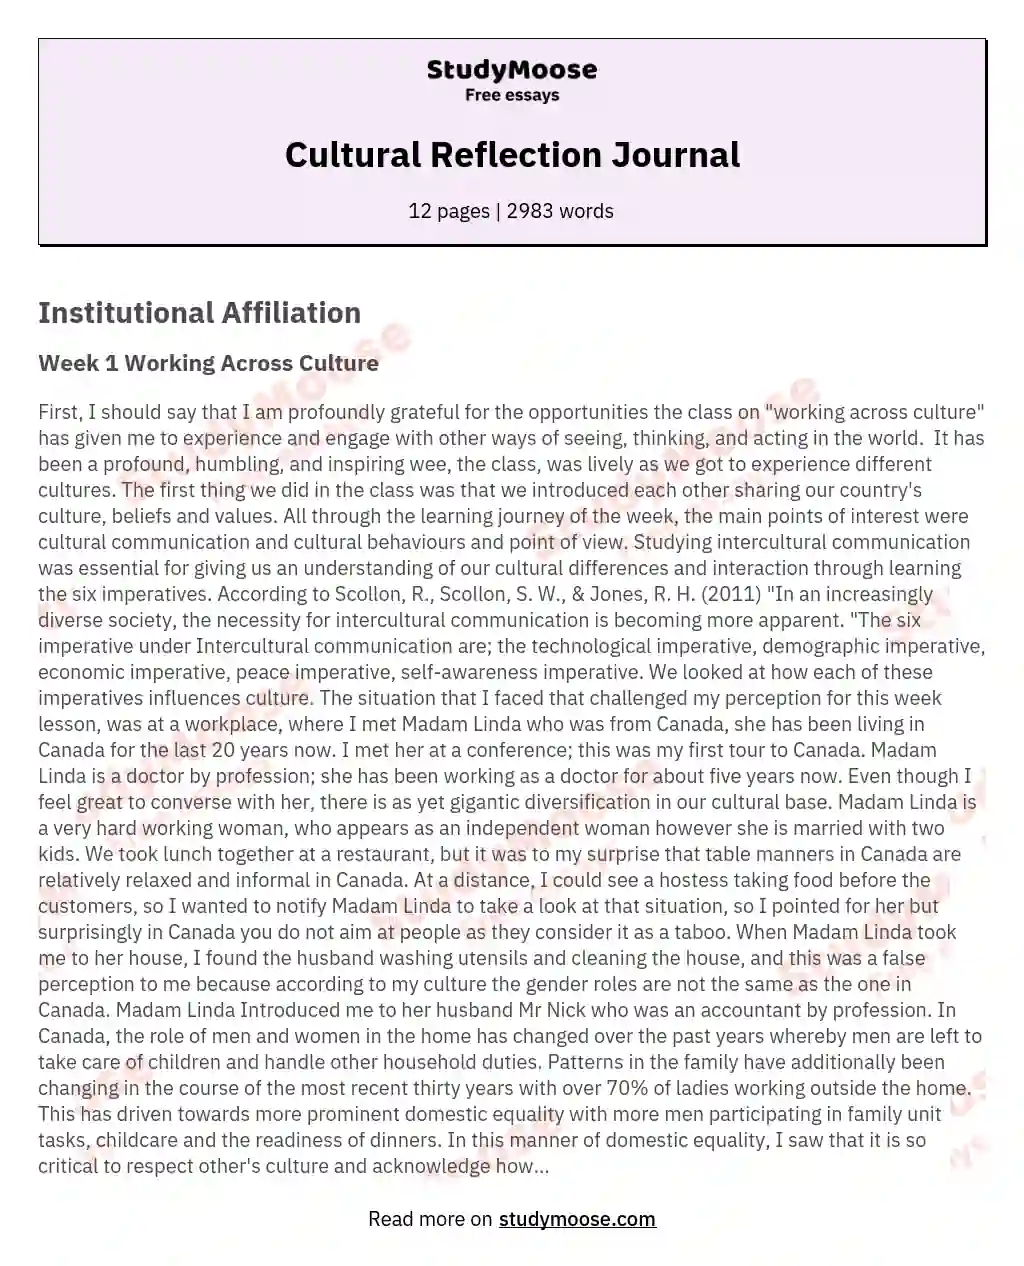 Cultural Reflection Journal essay